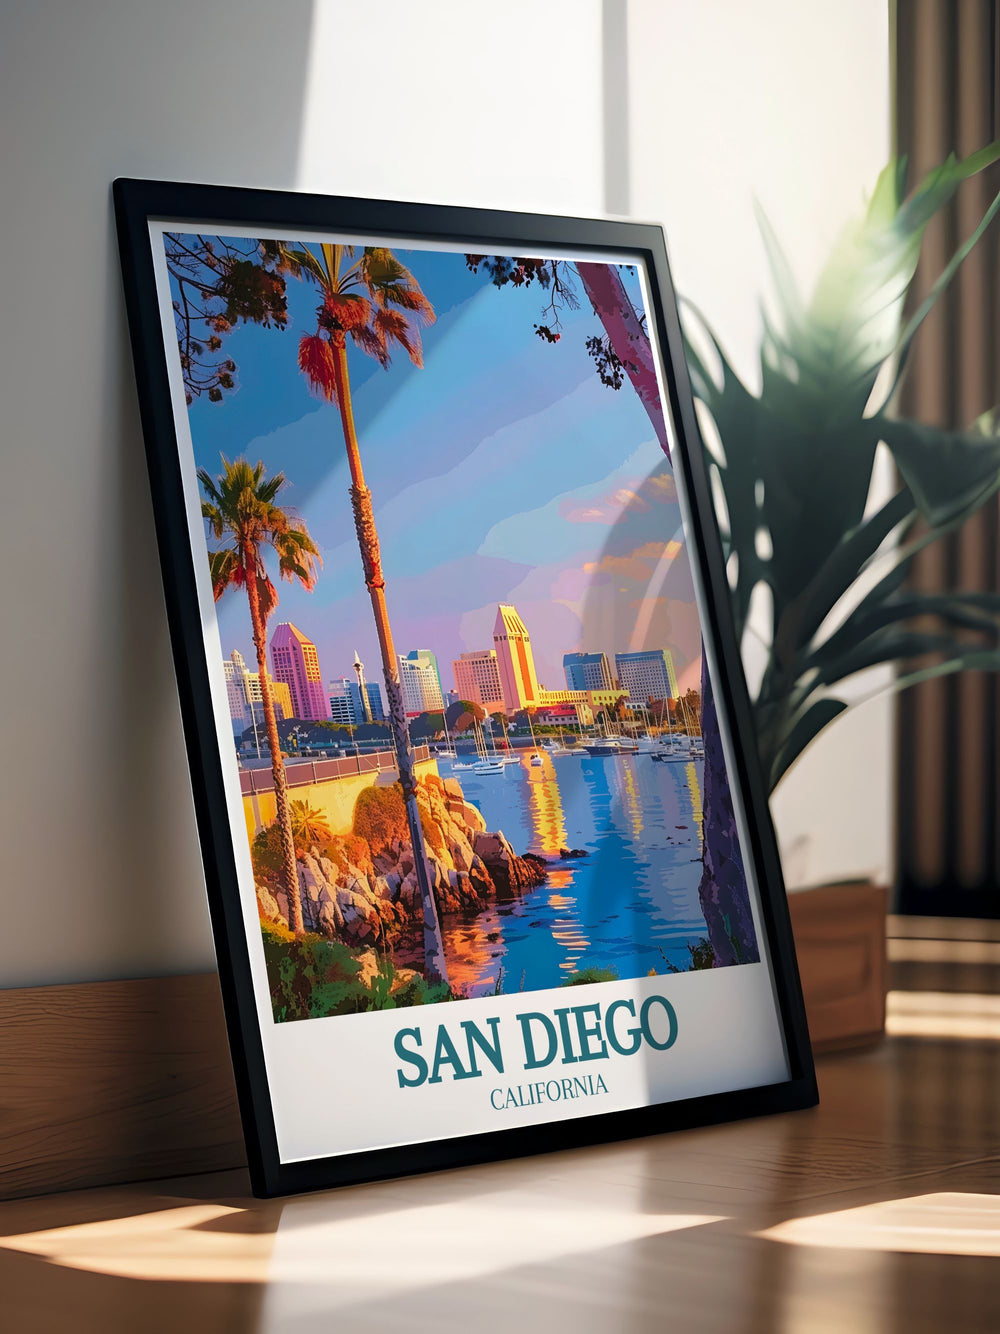 Enhance your home decor with San Diego beach artwork. This stunning print captures the essence of Californias coastal charm, making it a perfect California gift. Add a touch of beachside elegance to your living space with this beautiful San Diego beach print.